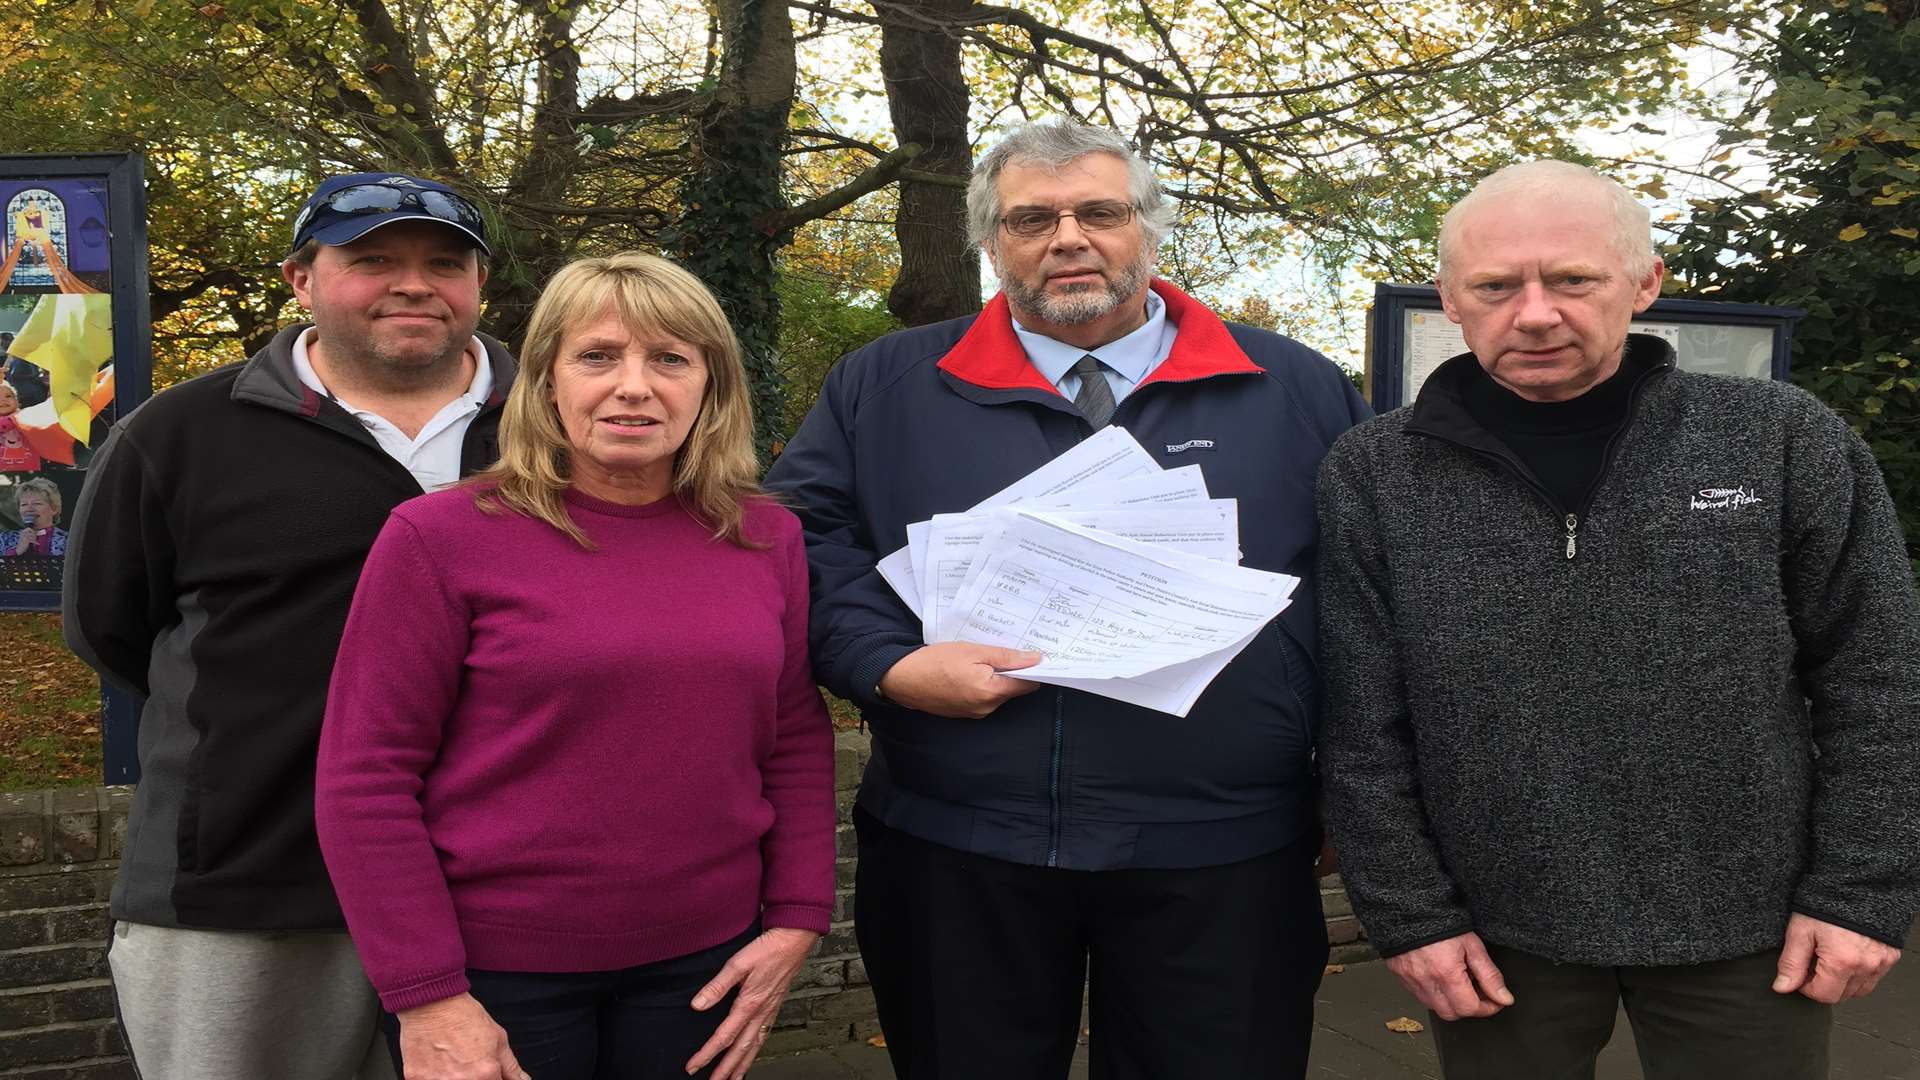 Shop owners Jason Down, Susan Birch and Myles Young with Cllr Mike Eddy holding the petition